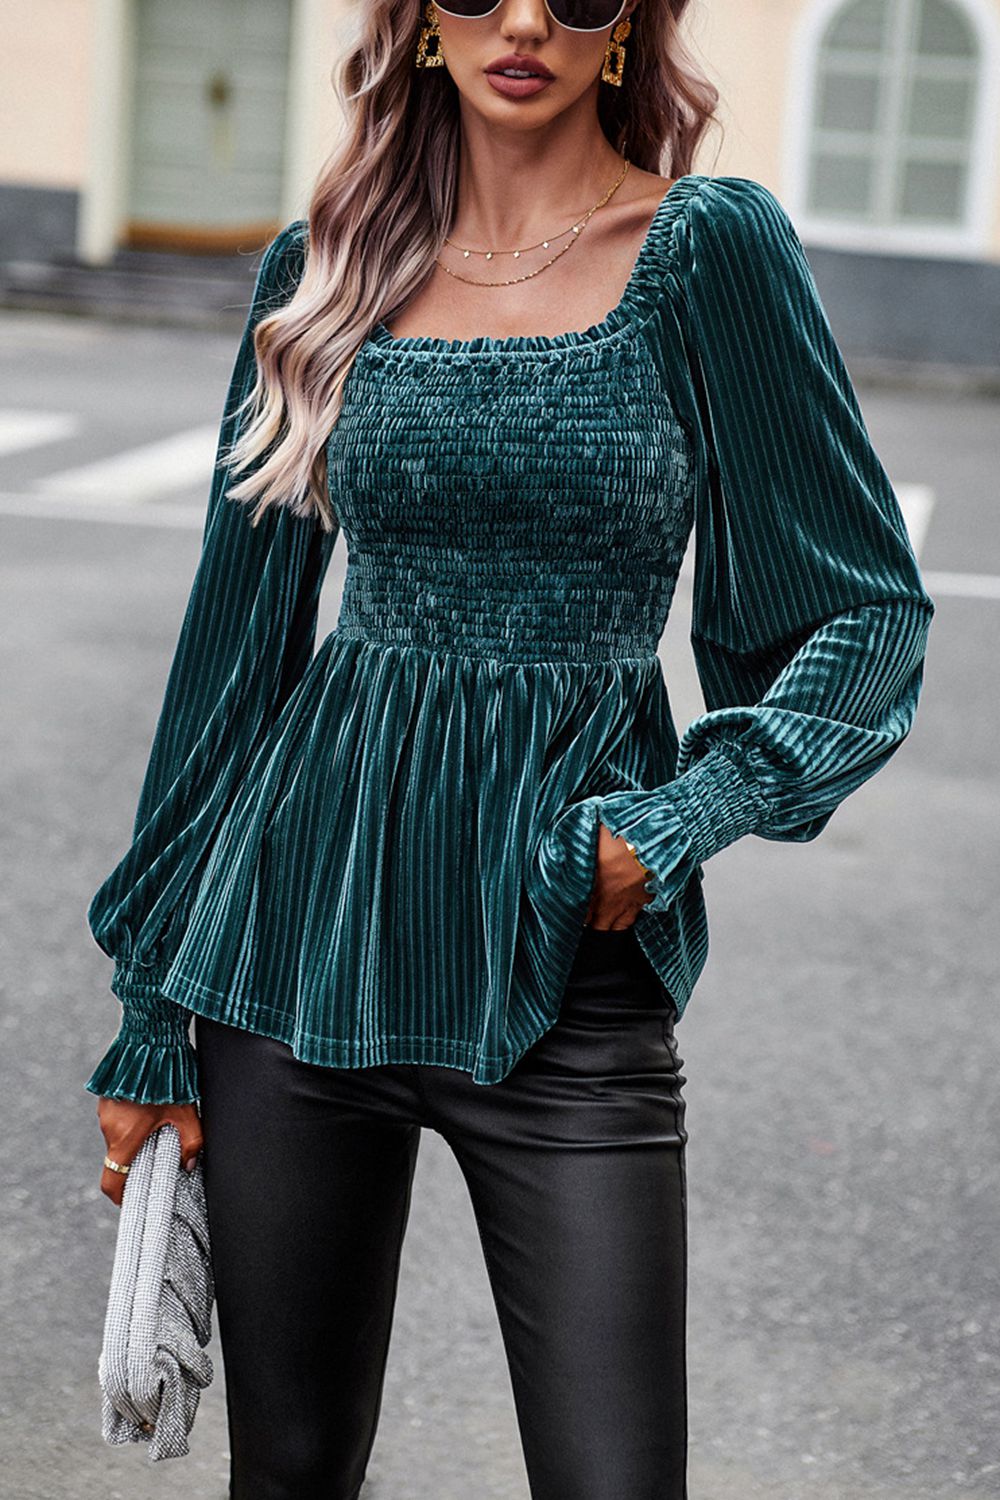 Smocked Square Neck Long Sleeve Blouse - Women’s Clothing & Accessories - Shirts & Tops - 17 - 2024